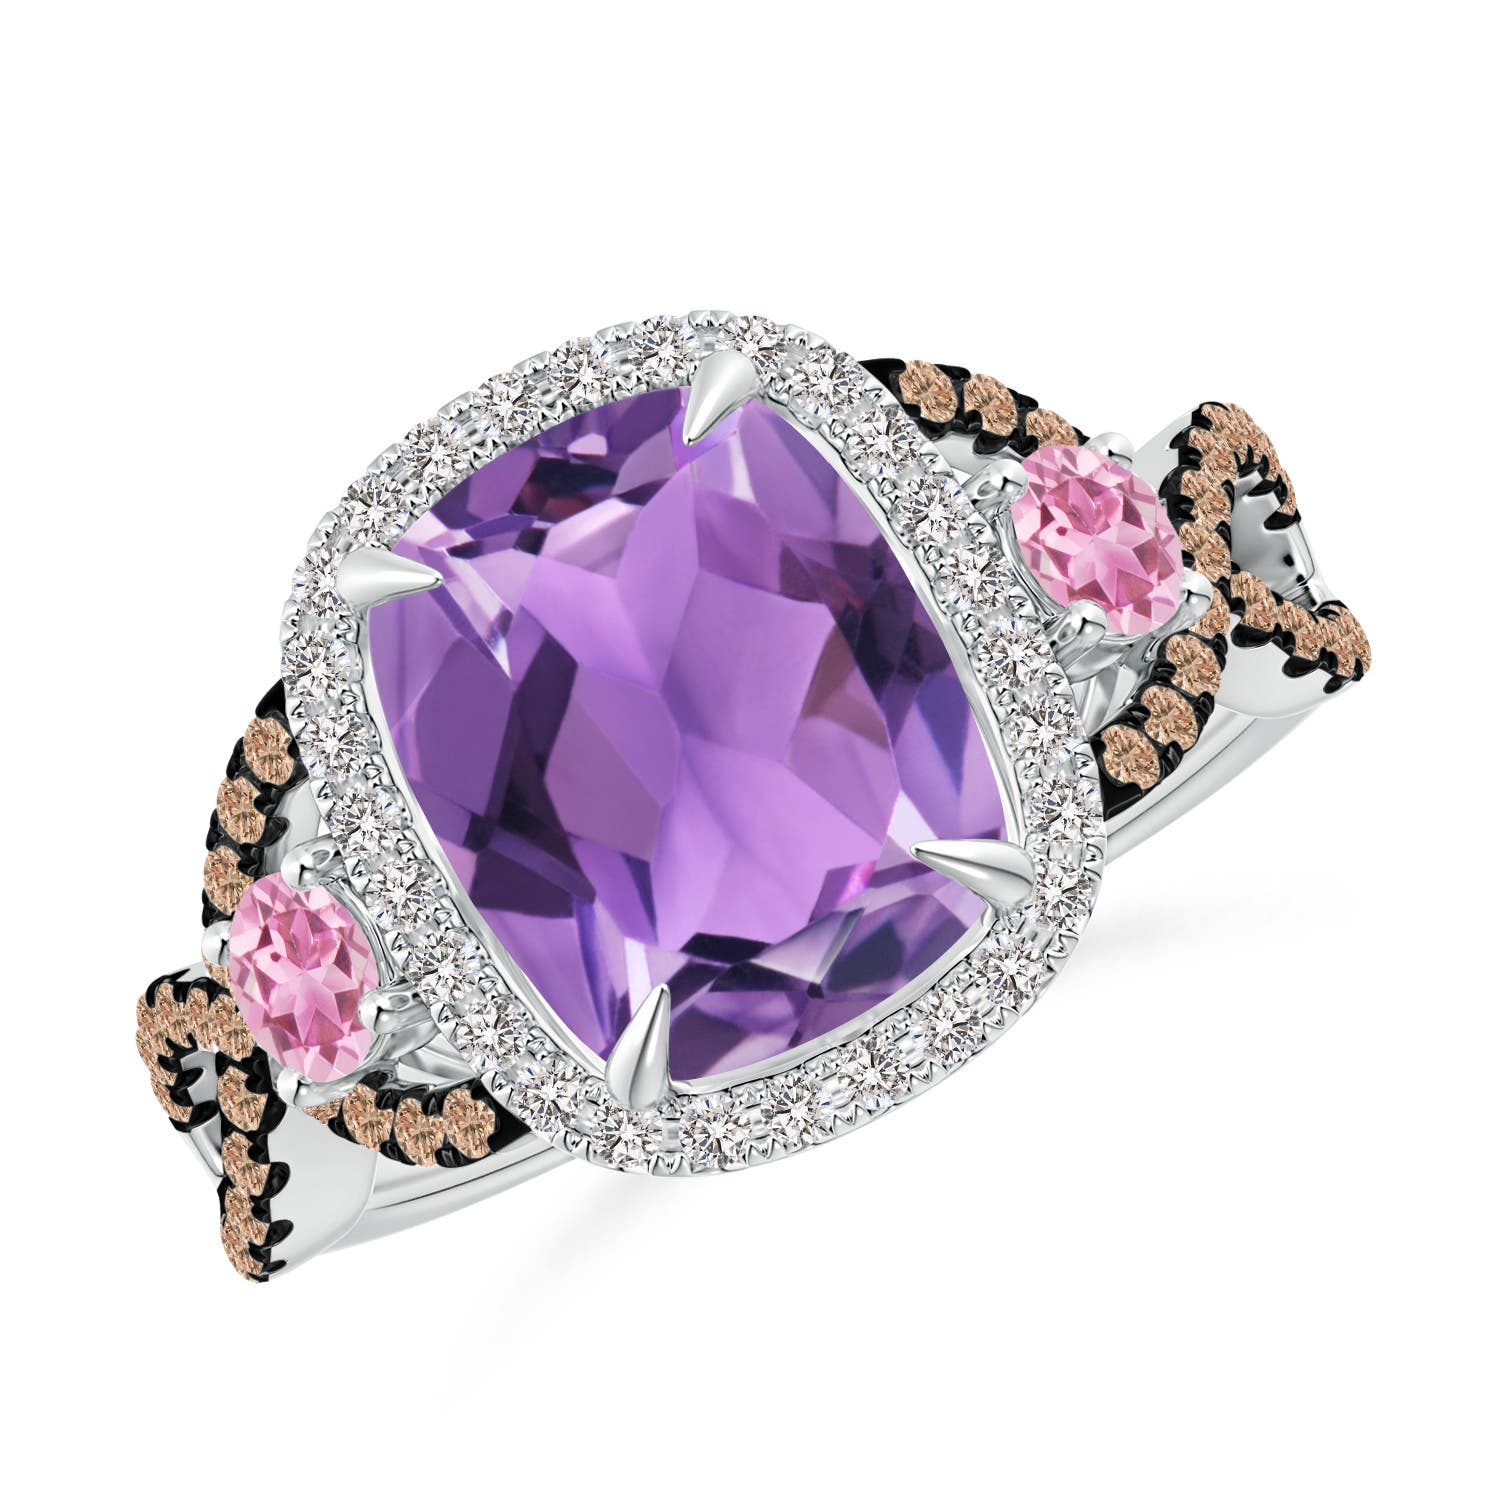 AA - Amethyst / 3.39 CT / 14 KT White Gold